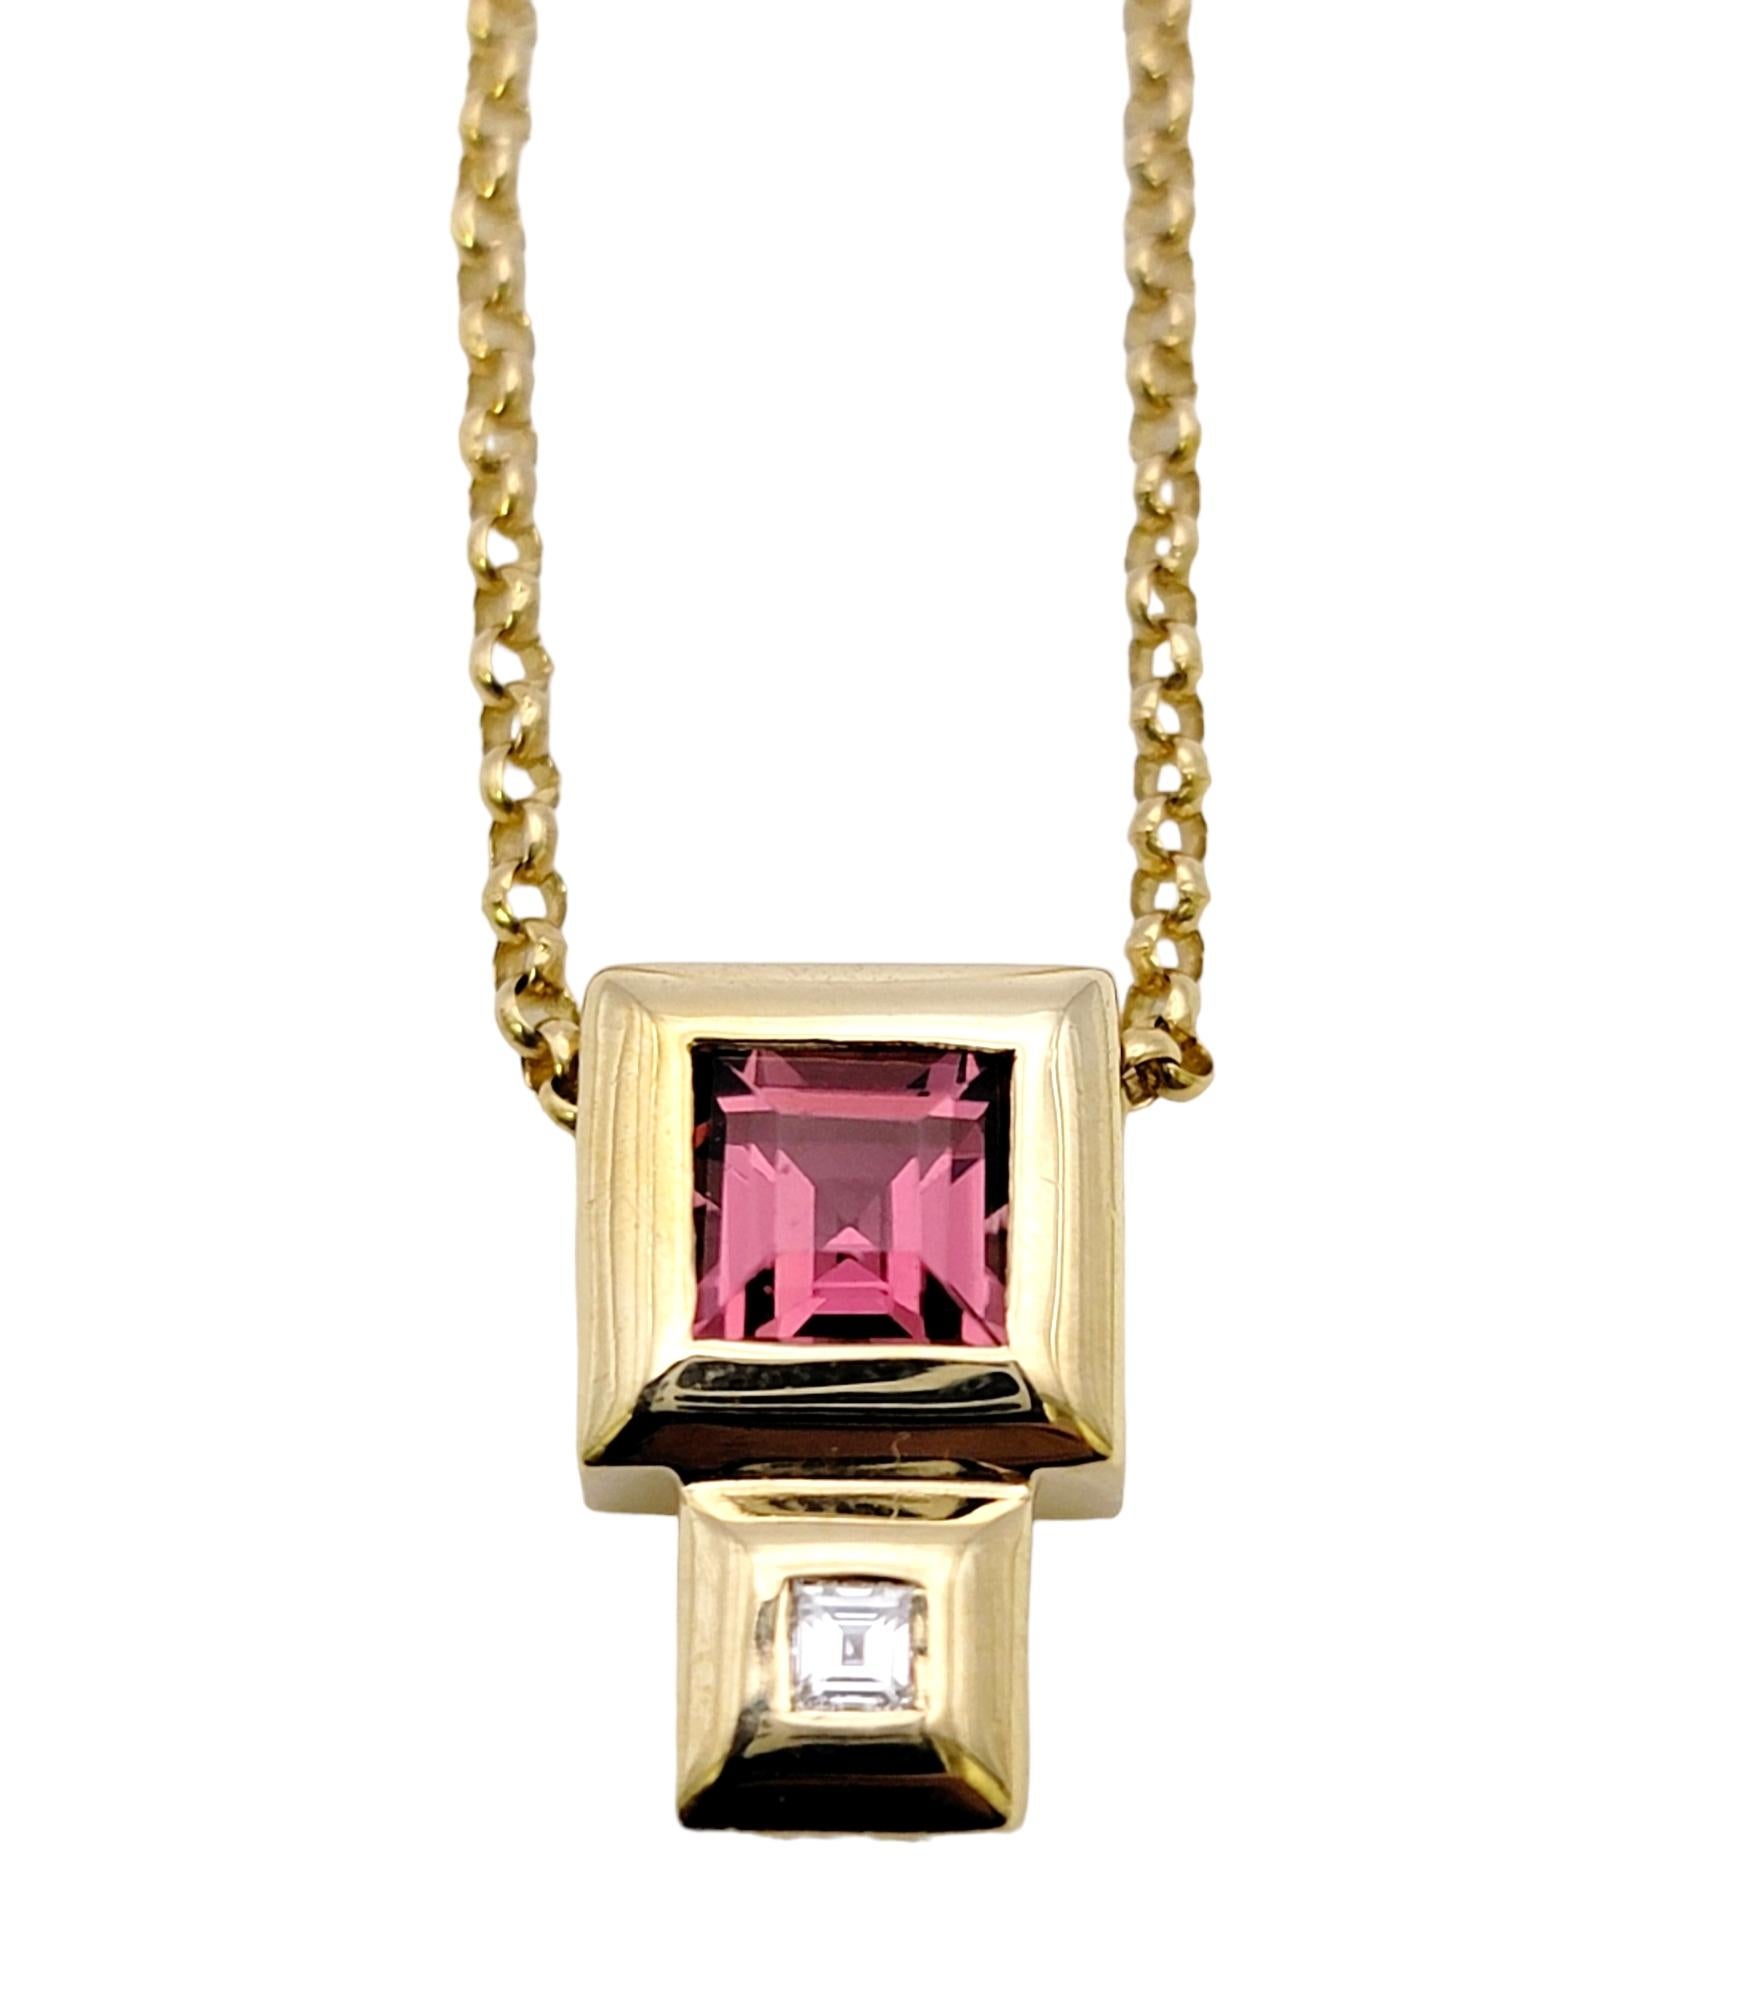 Gorgeous contemporary pendant necklace with the perfect pop of color.  Warm yellow gold is paired with sparkling gemstones in a chic geometric design, making this modern beauty one of your new favorite pieces. 

This lovely necklace features a